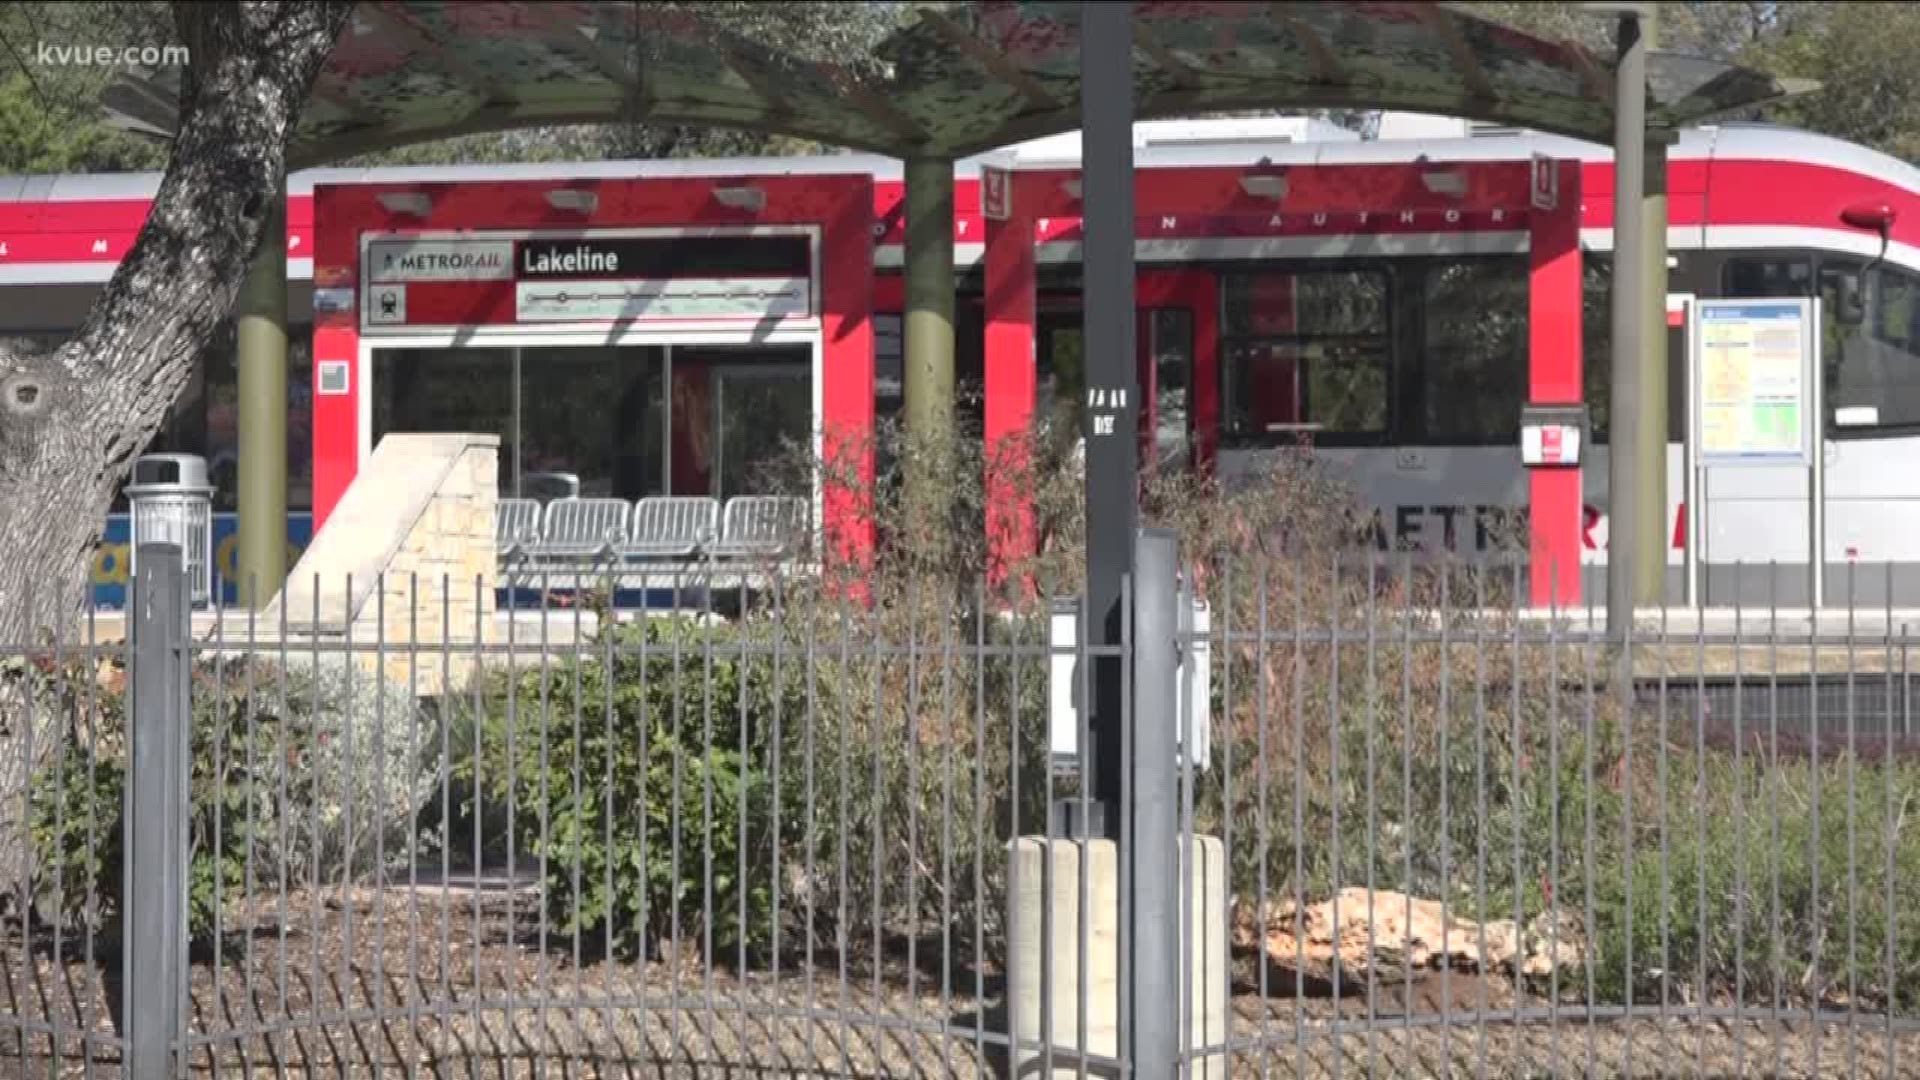 Bus and rail services could soon come to an end in Leander. The city is considering withdrawing from CapMetro's service area.